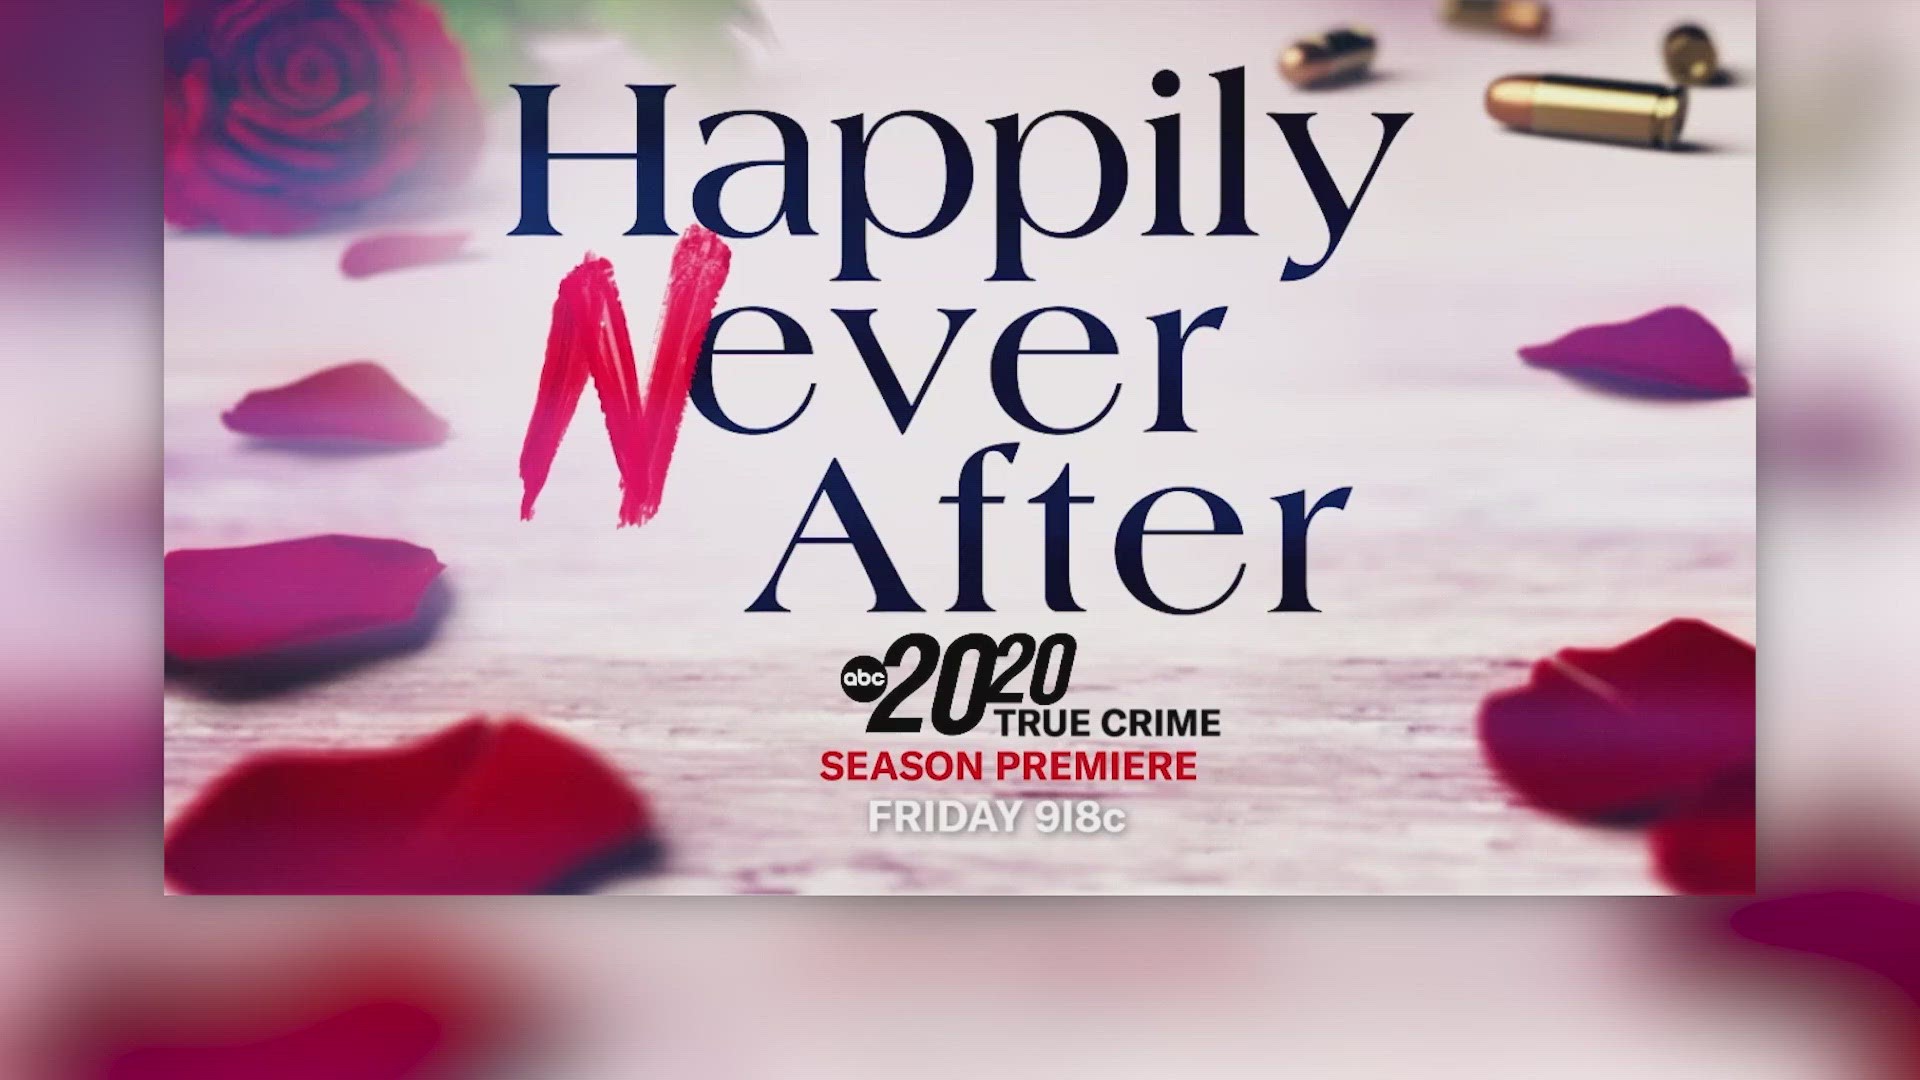 ABC's 20/20 returns for its 46th season on Friday, Sept. 28, and the two-hour season premiere kicks off with a shocking true crime story based in Dallas.